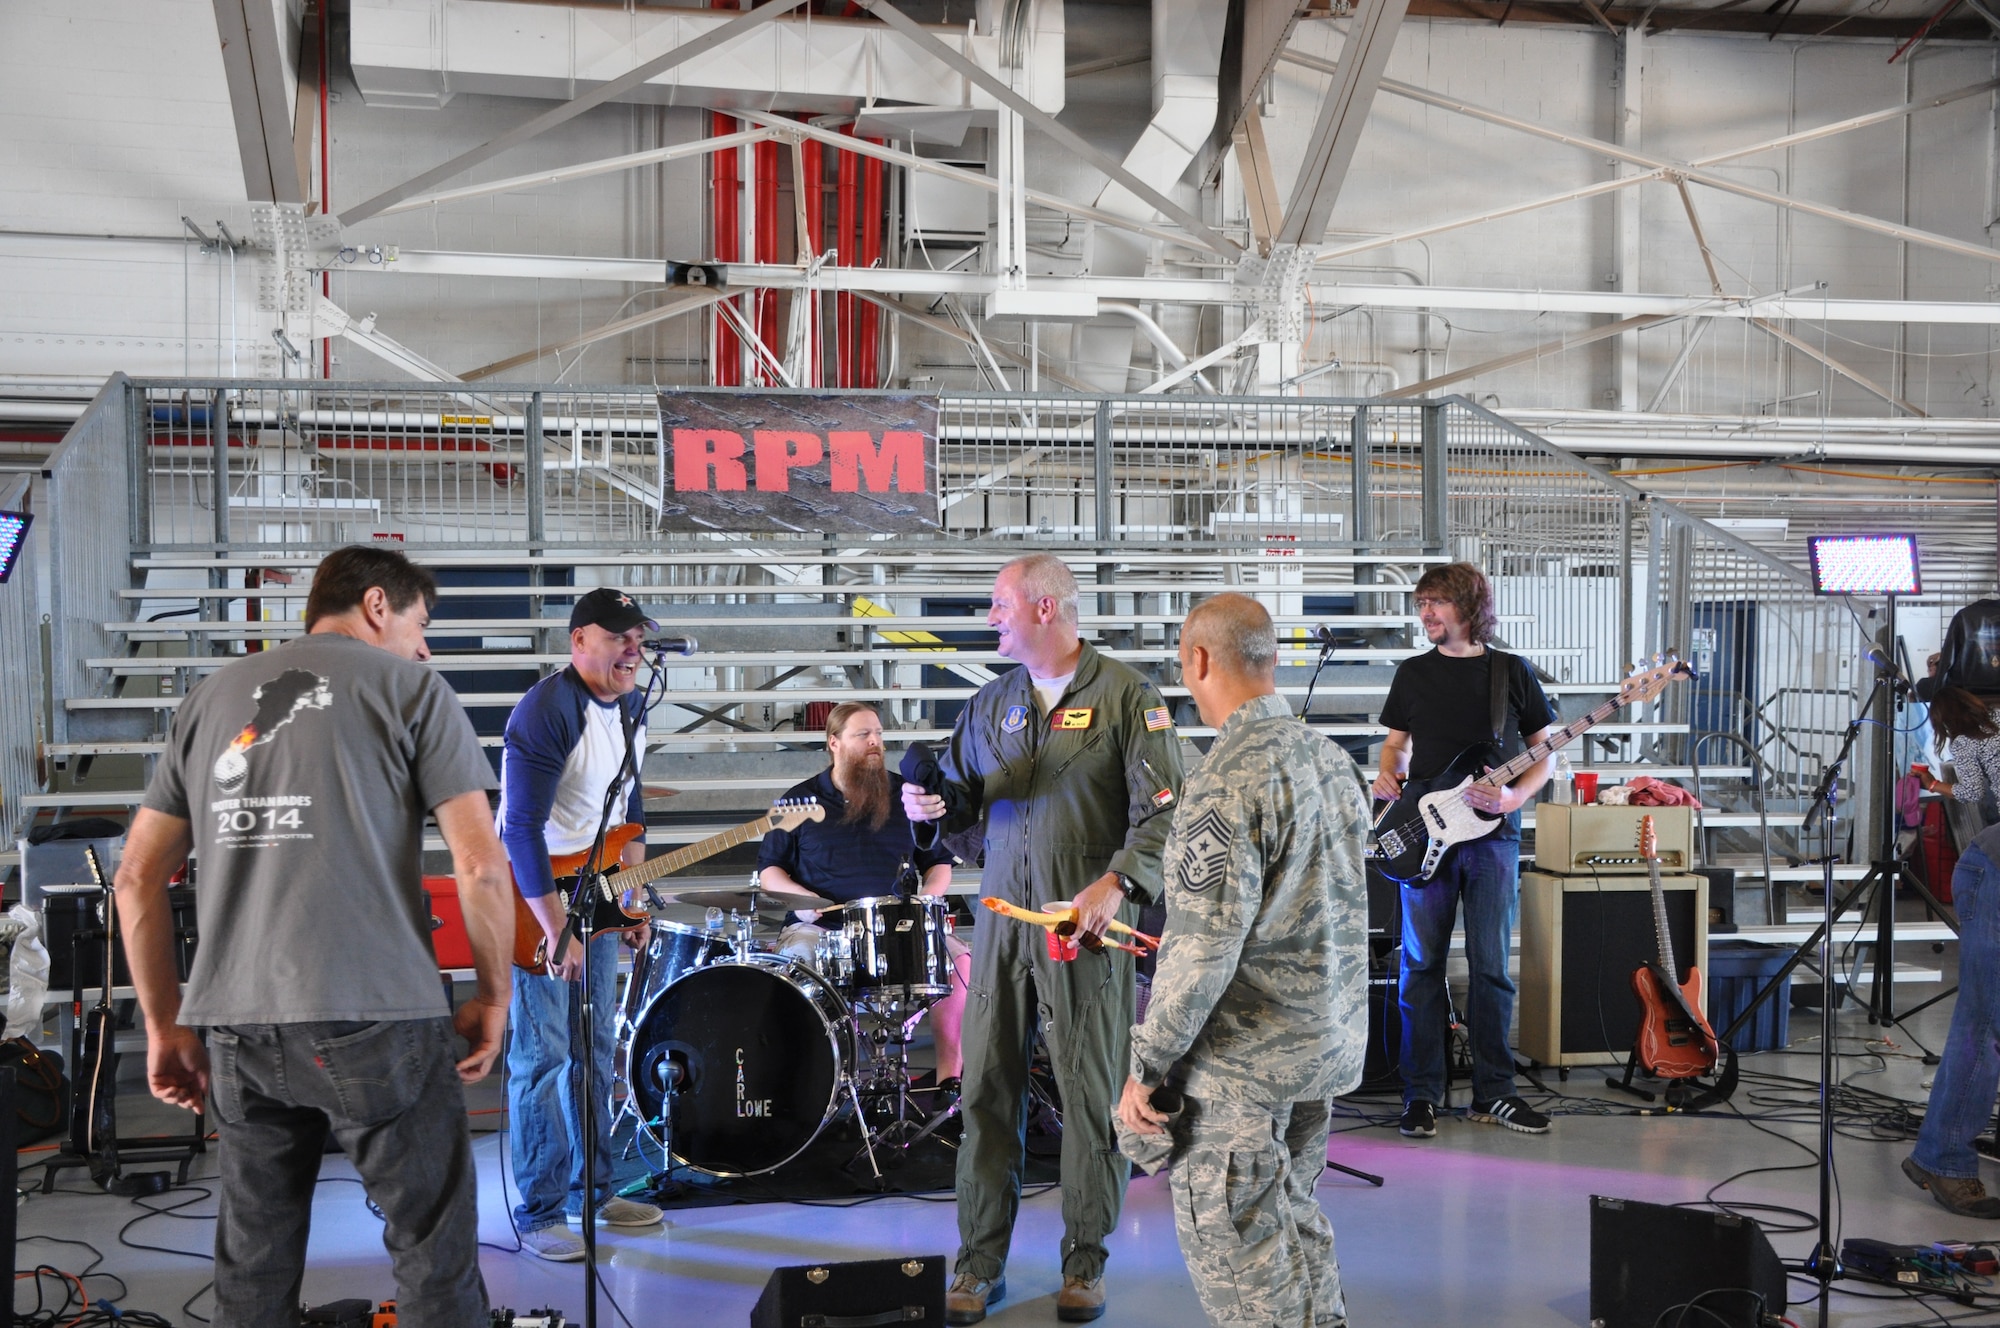 507th Air Refueling Wing commander Col. Brian S. Davis cracks a joke withTulsa rock cover band, RPM, before delivering a speech Sept. 12, 2015, at the 507th ARW Family Day celebration at Tinker Air Force Base, Okla. Each year, families are invited to the base for food, fun, and entertainment. (U.S. Air Force photo by Tech. Sgt. Charles Taylor)